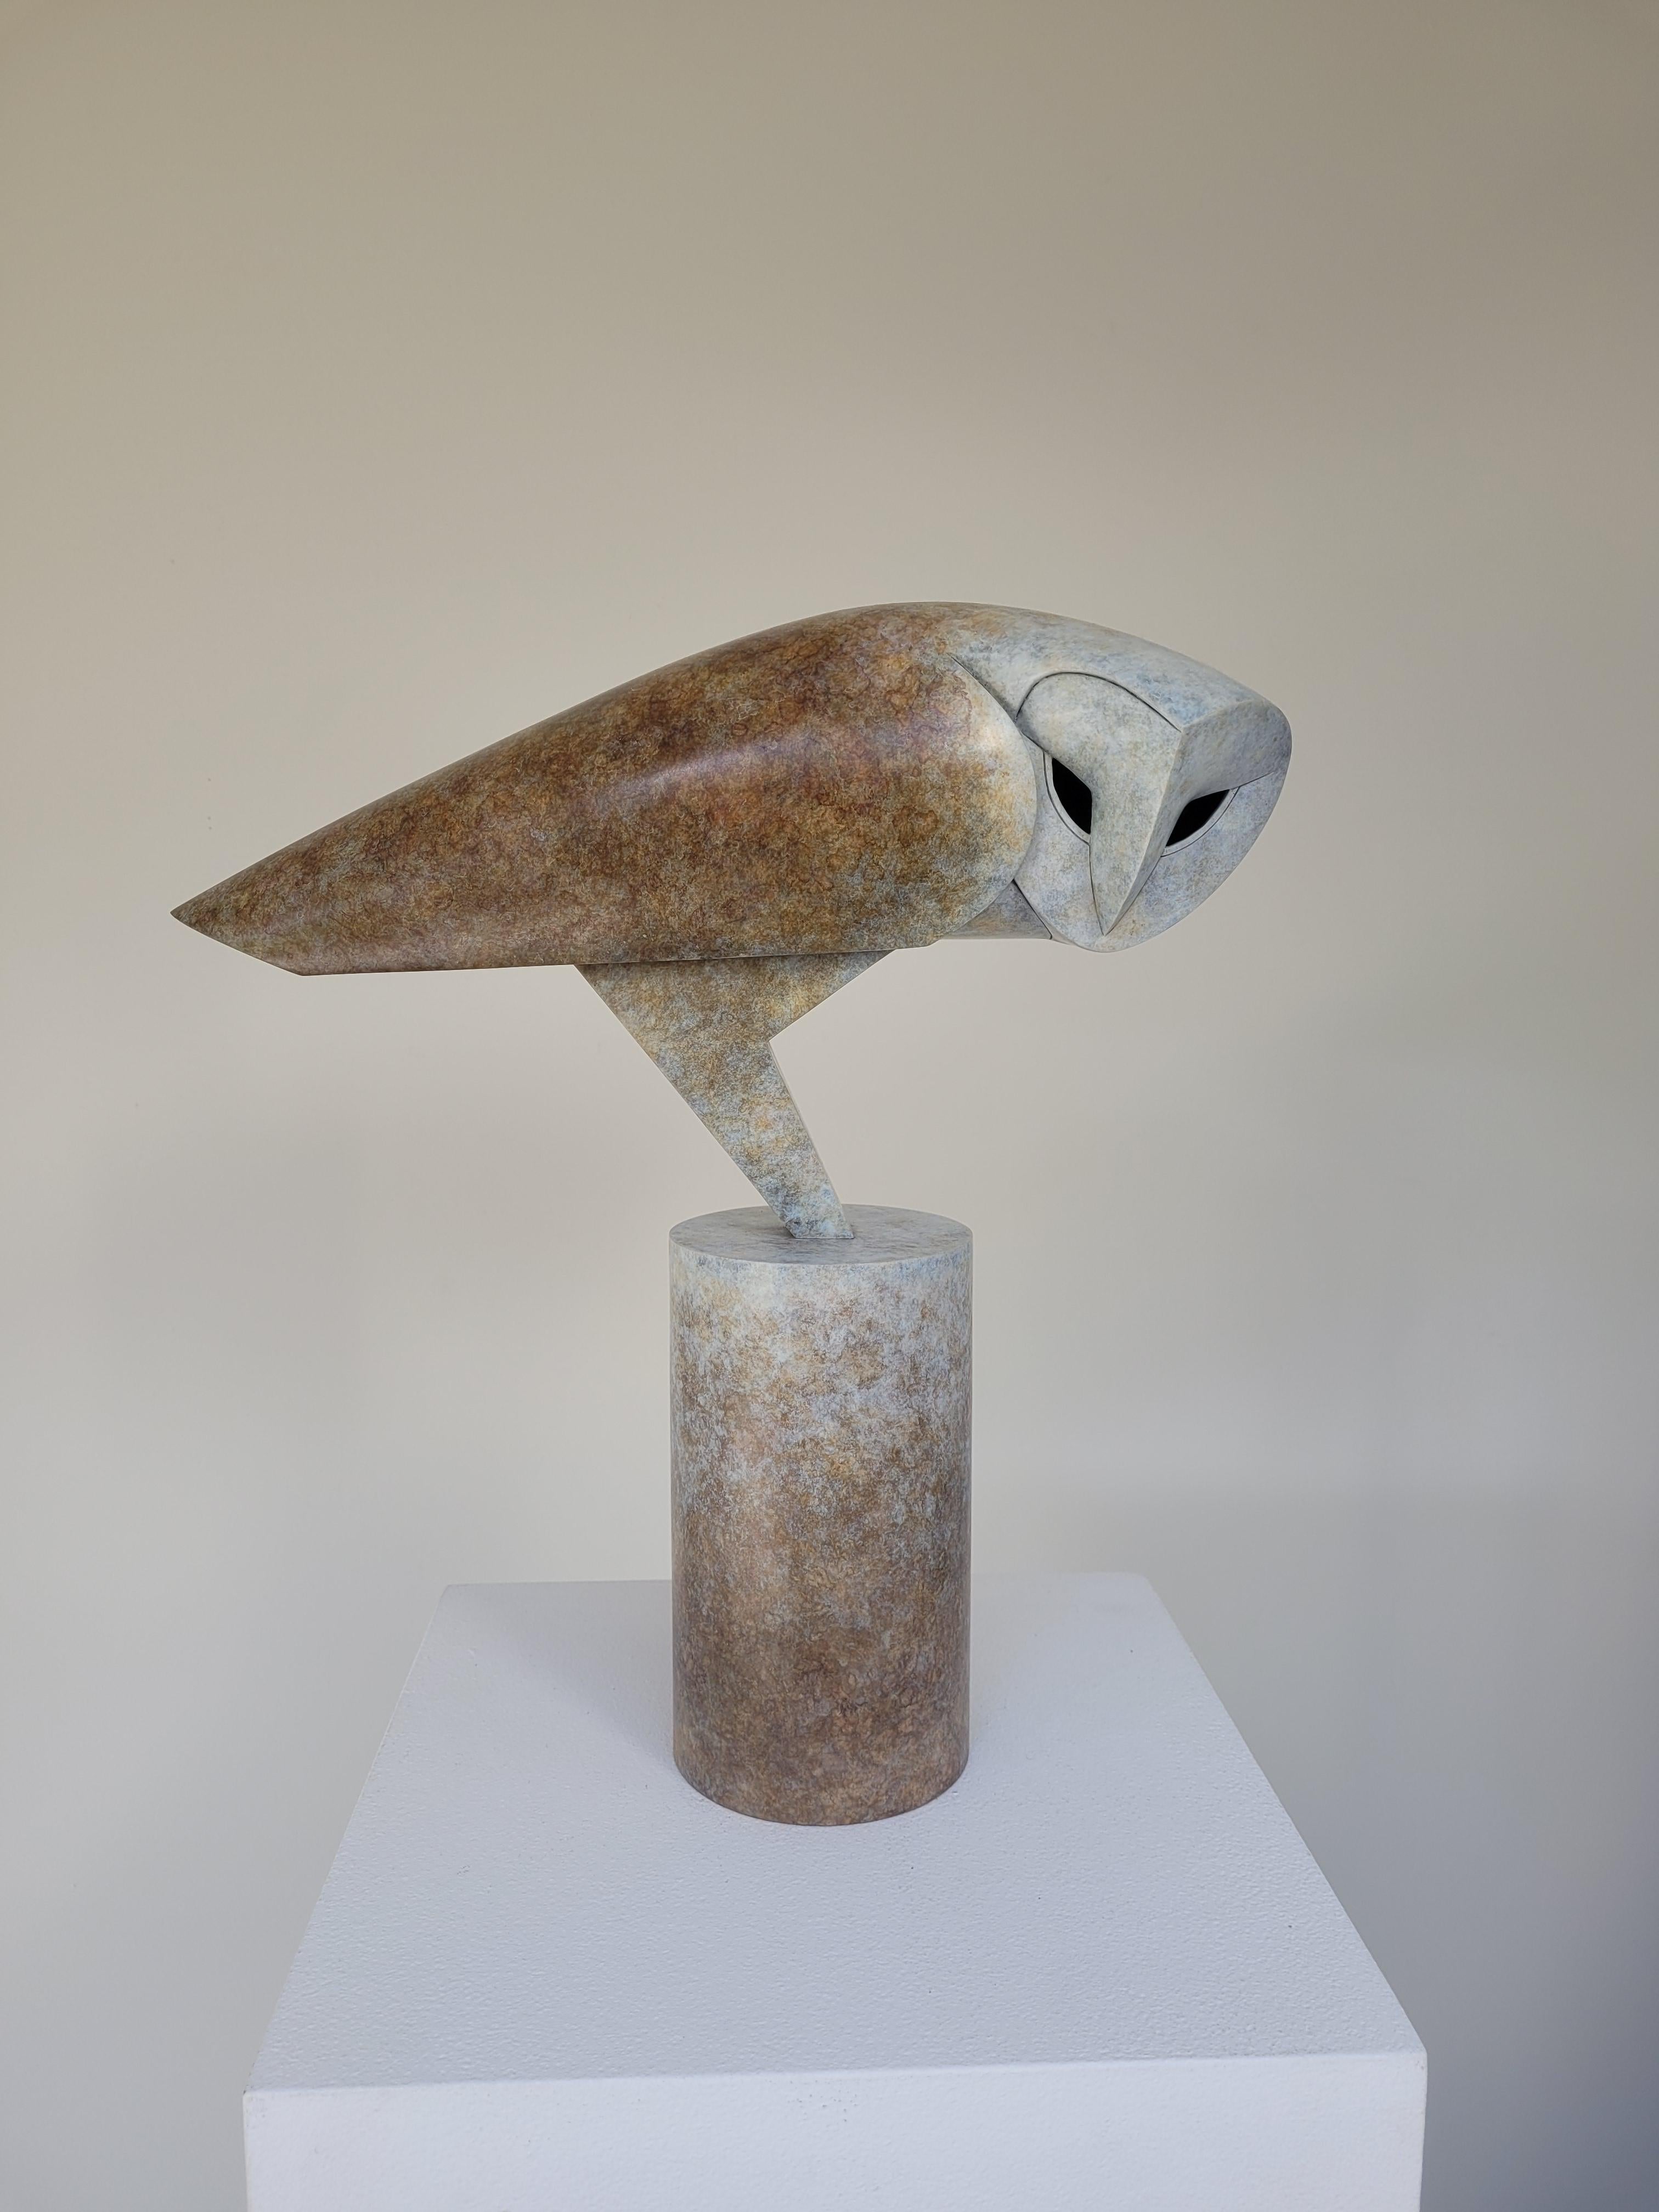 Anthony Theakston - ''New Sideways" Contemporary Bronze Sculpture Portrait  of an Owl, Barn Owl For Sale at 1stDibs